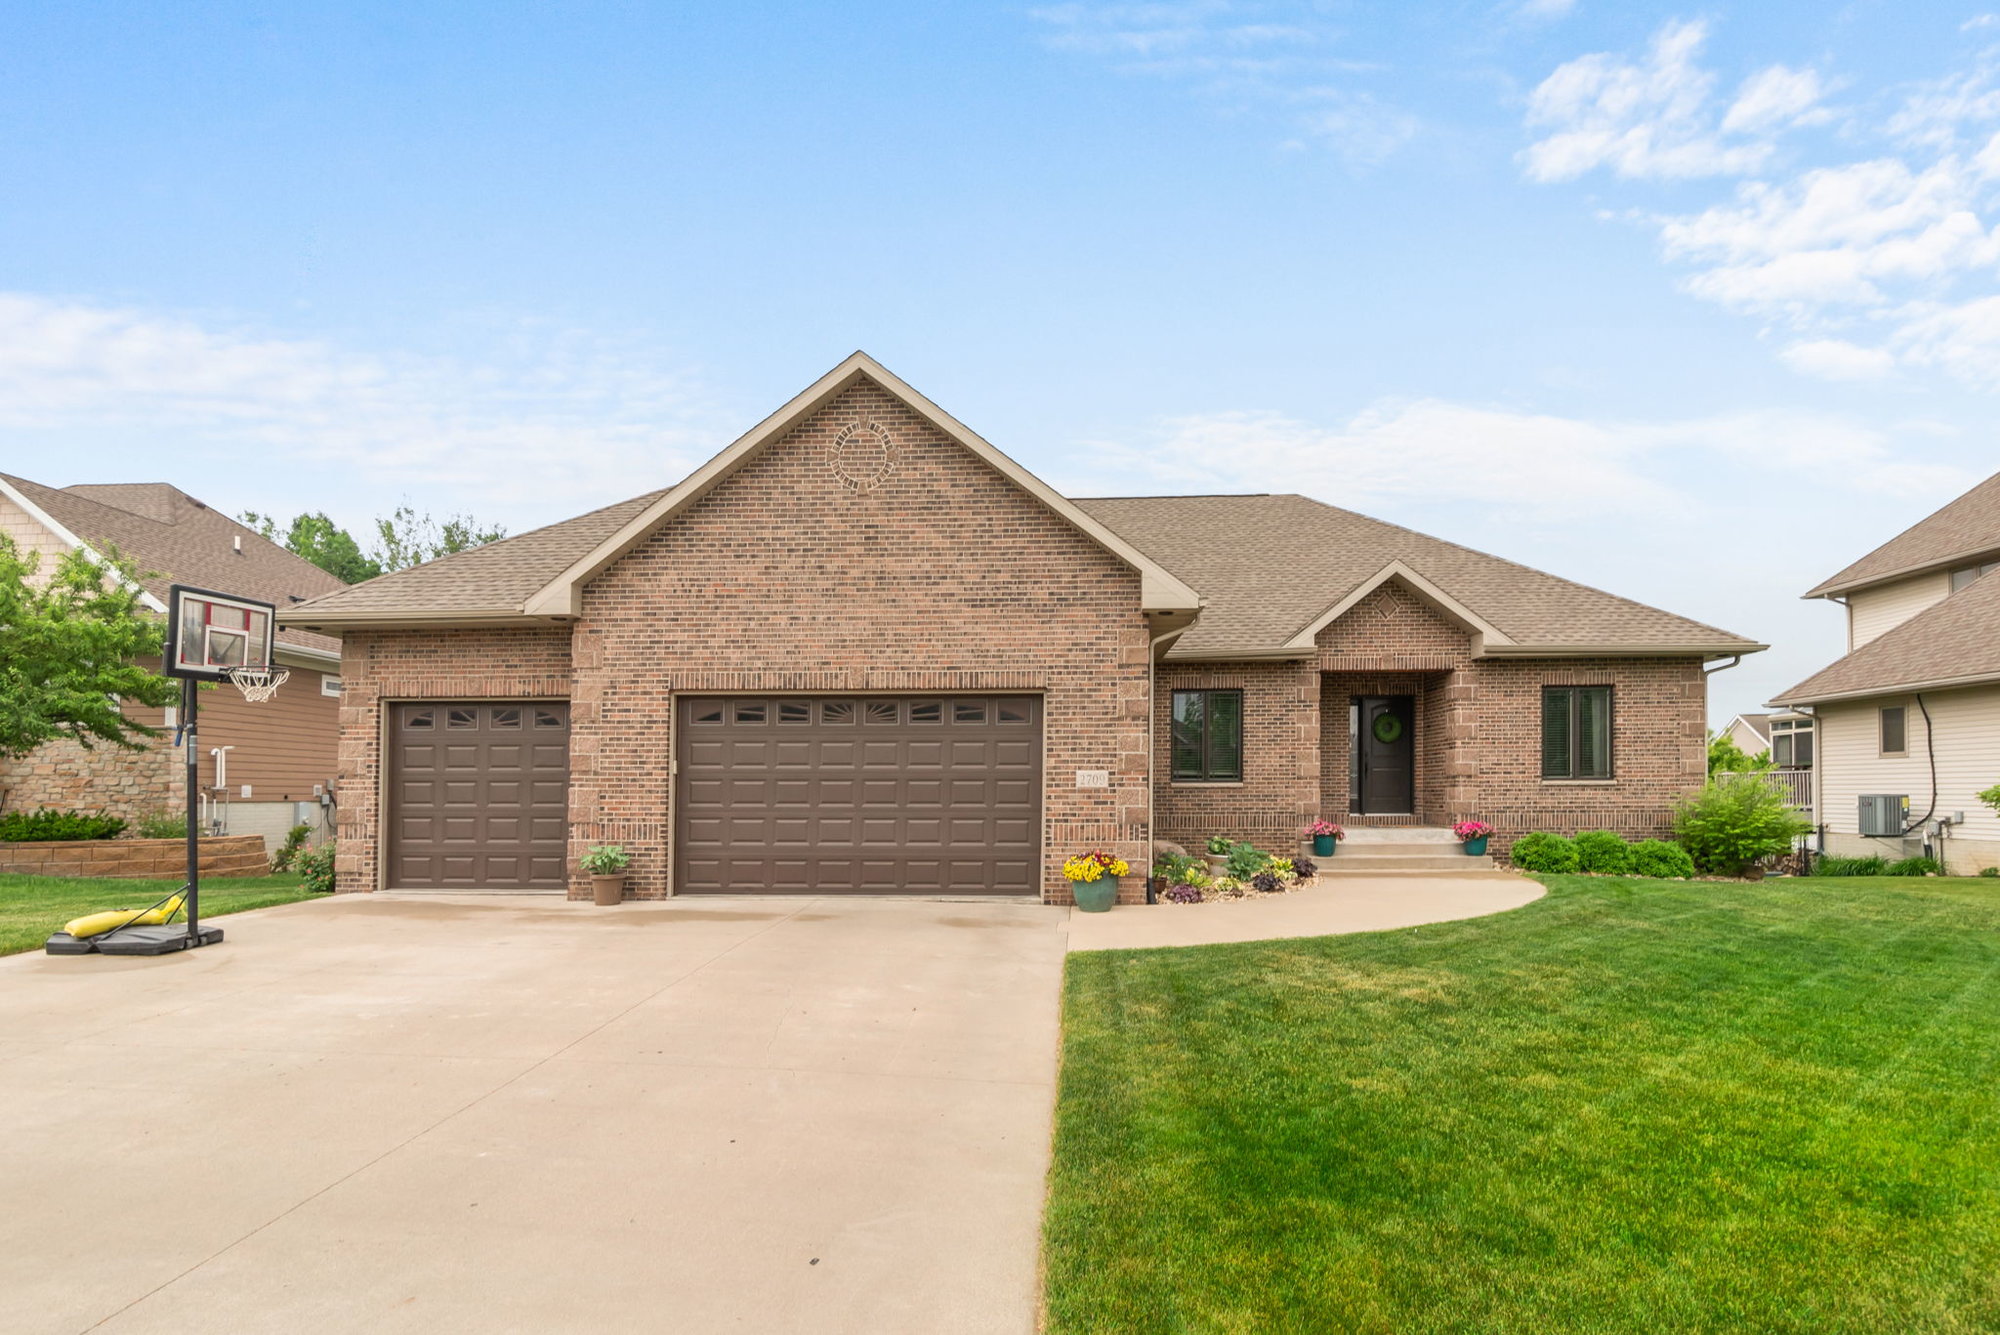 Comfort Meets Style in this Stunning Brick Ranch Home Located the Cedar Falls Ridges Neighborhood